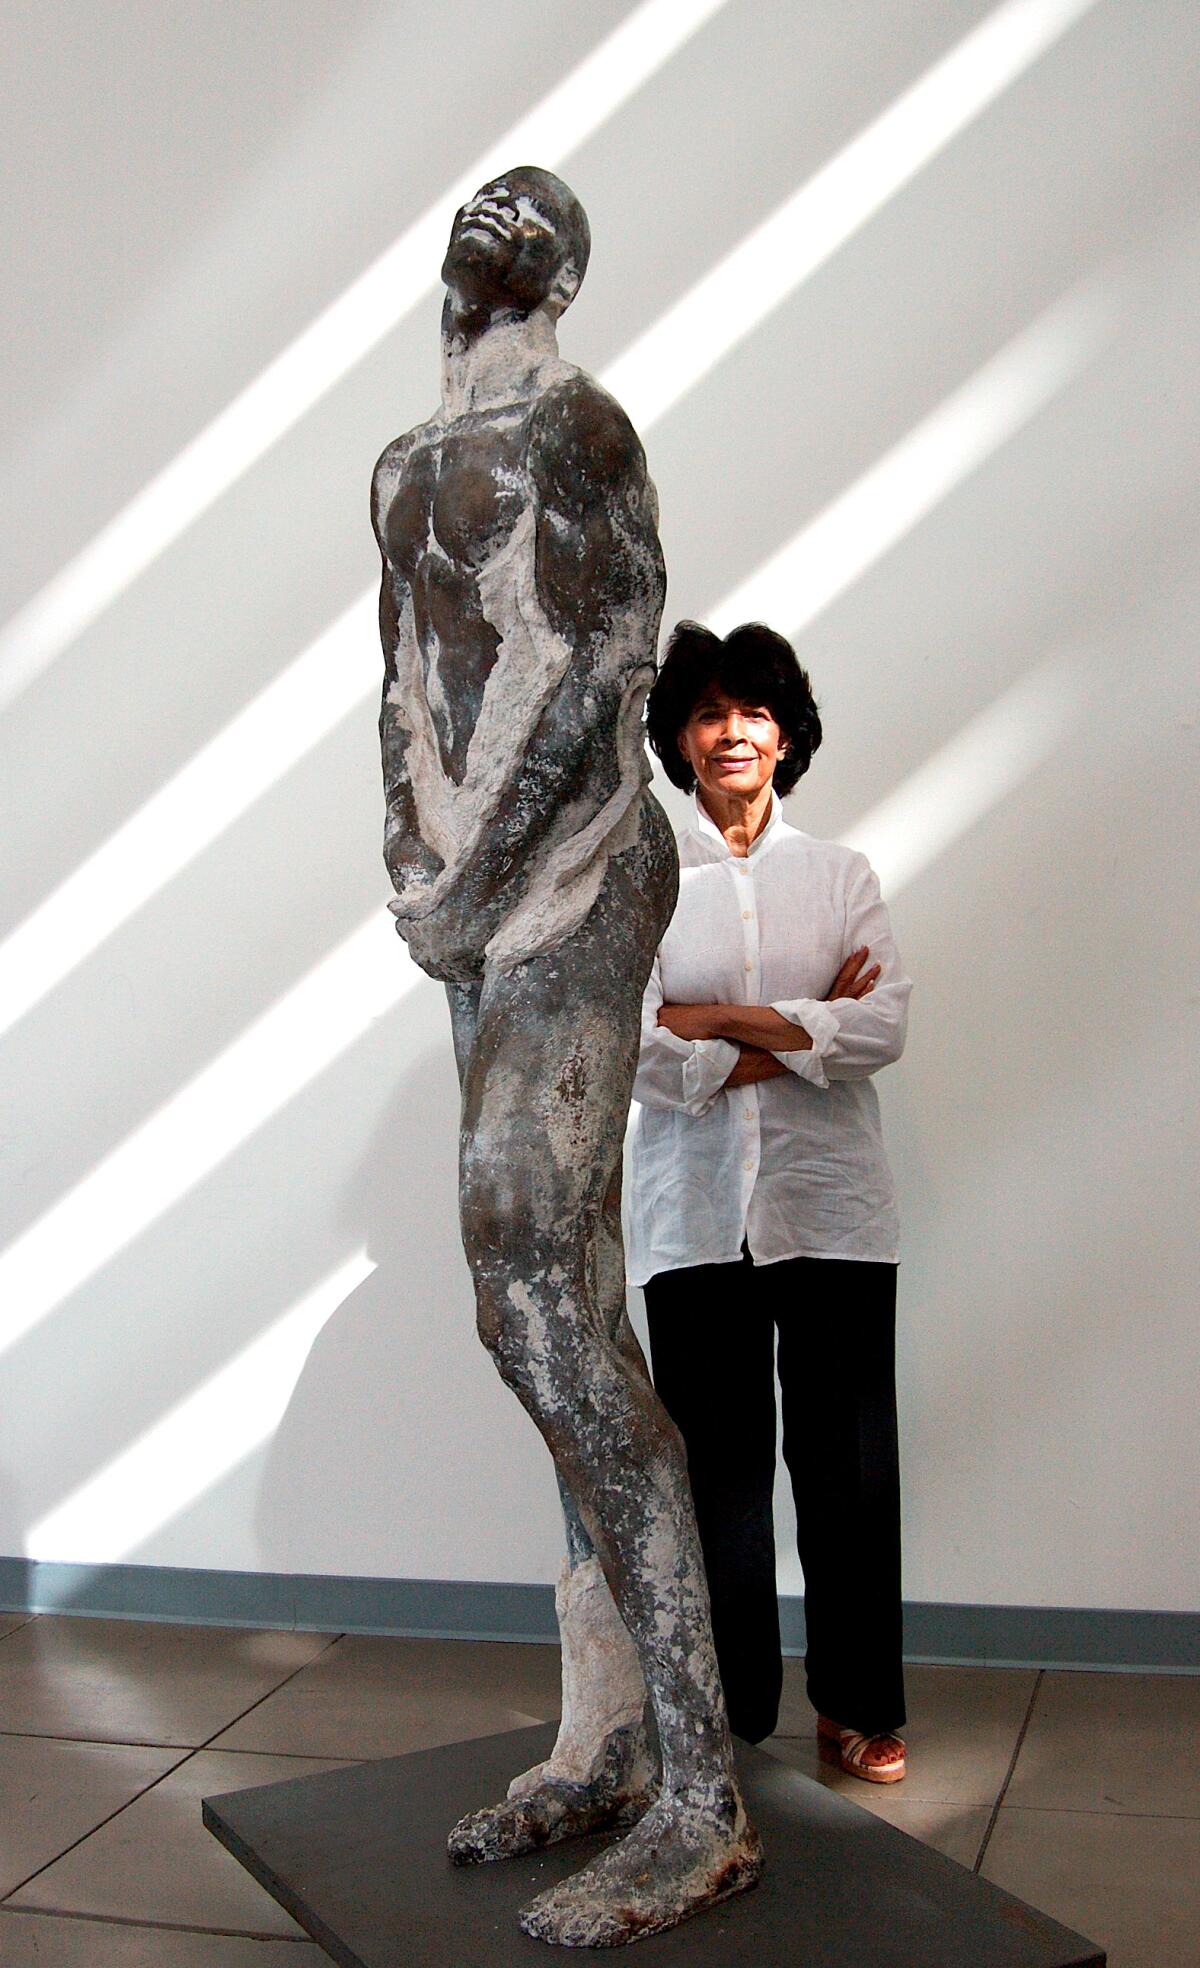 A woman in a white shirt next to a tall sculpture of a man